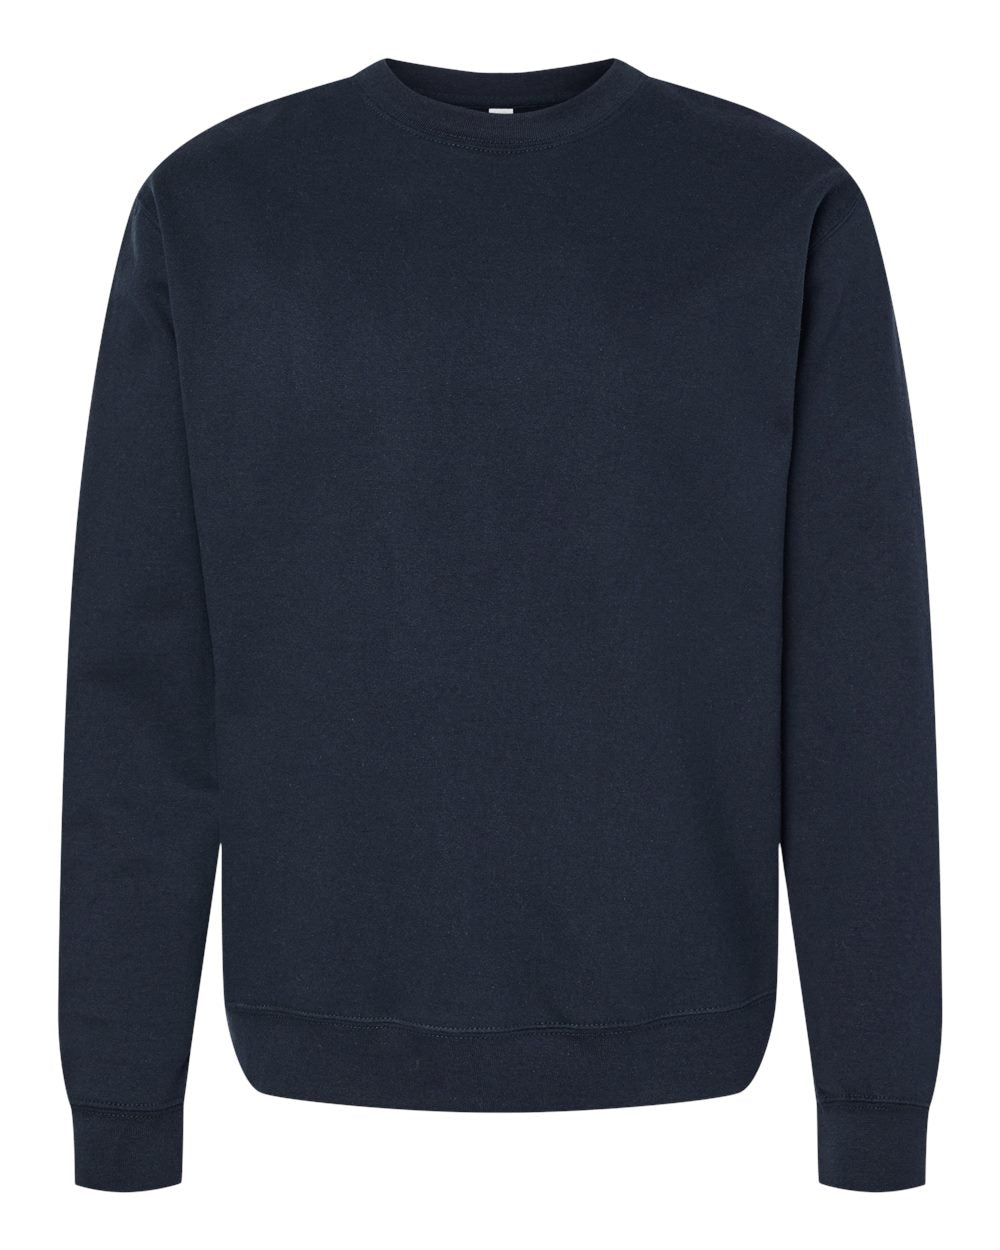 Independent Trading Co. - Midweight Sweatshirt - SS3000 XS - 5XL